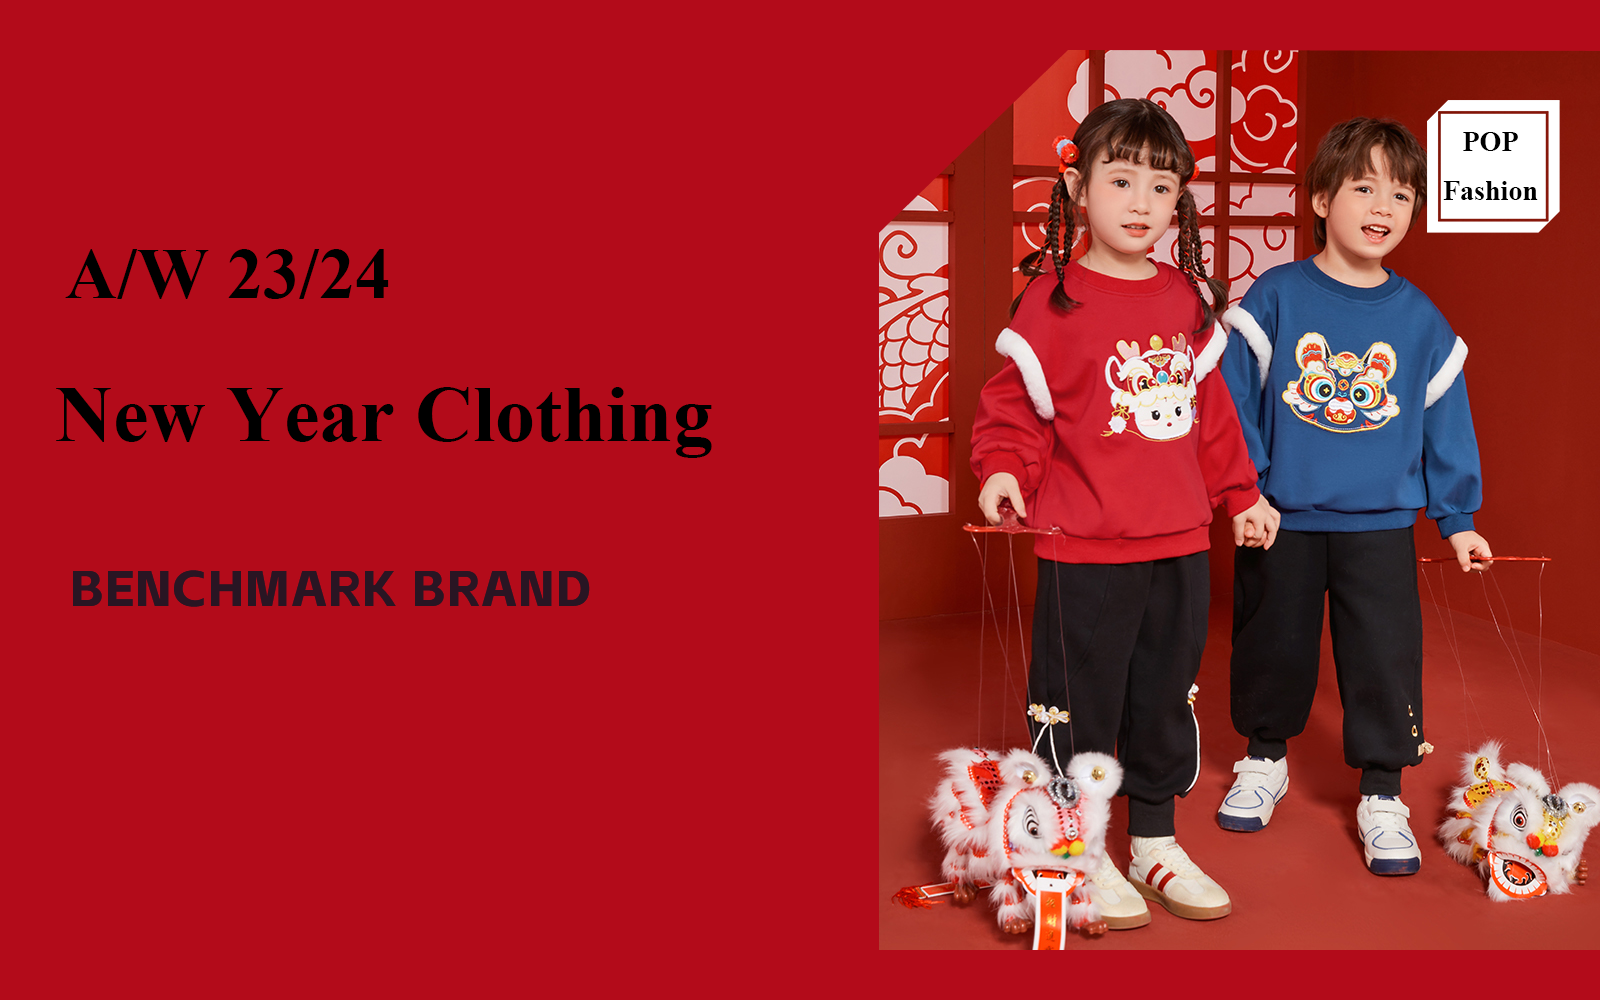 New Year Clothing -- The Comprehensive Analysis of Benchmark Kidswear Brand